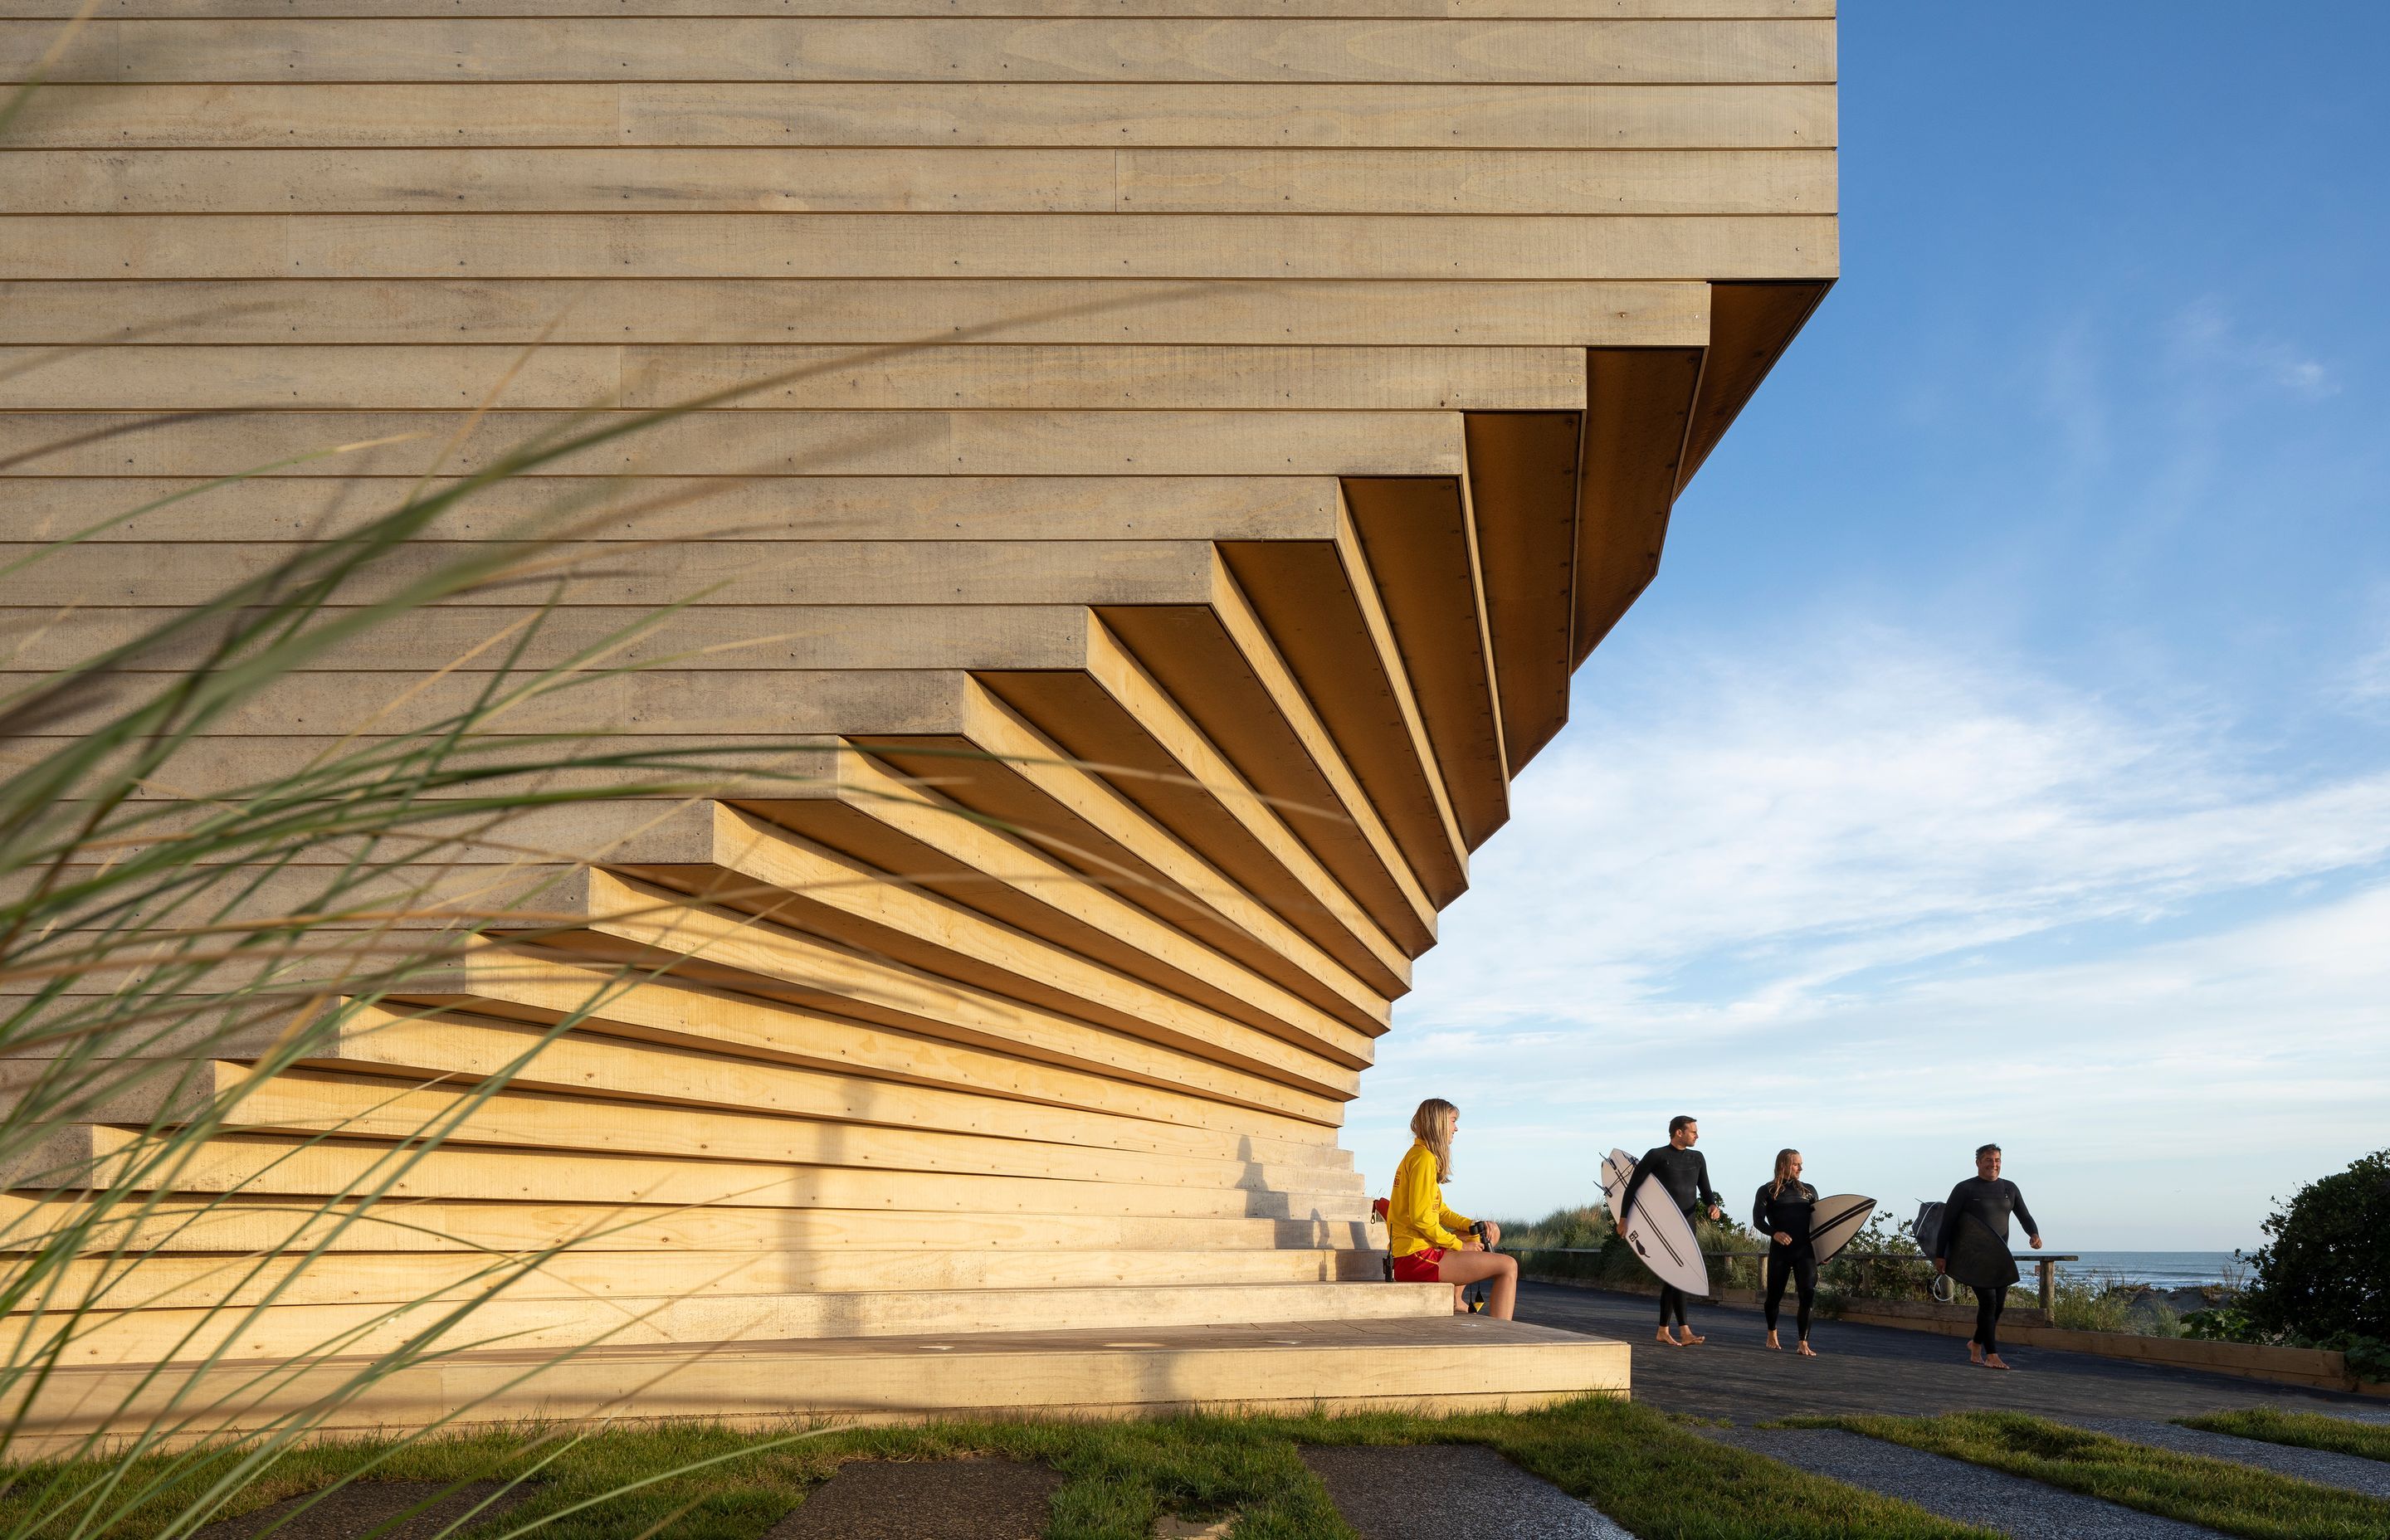 The sculptural fan of the Accoya cladding on the seafront elevation, gives the building a striking silhouette that speaks to the curves and undulations in the sand and driftwood.